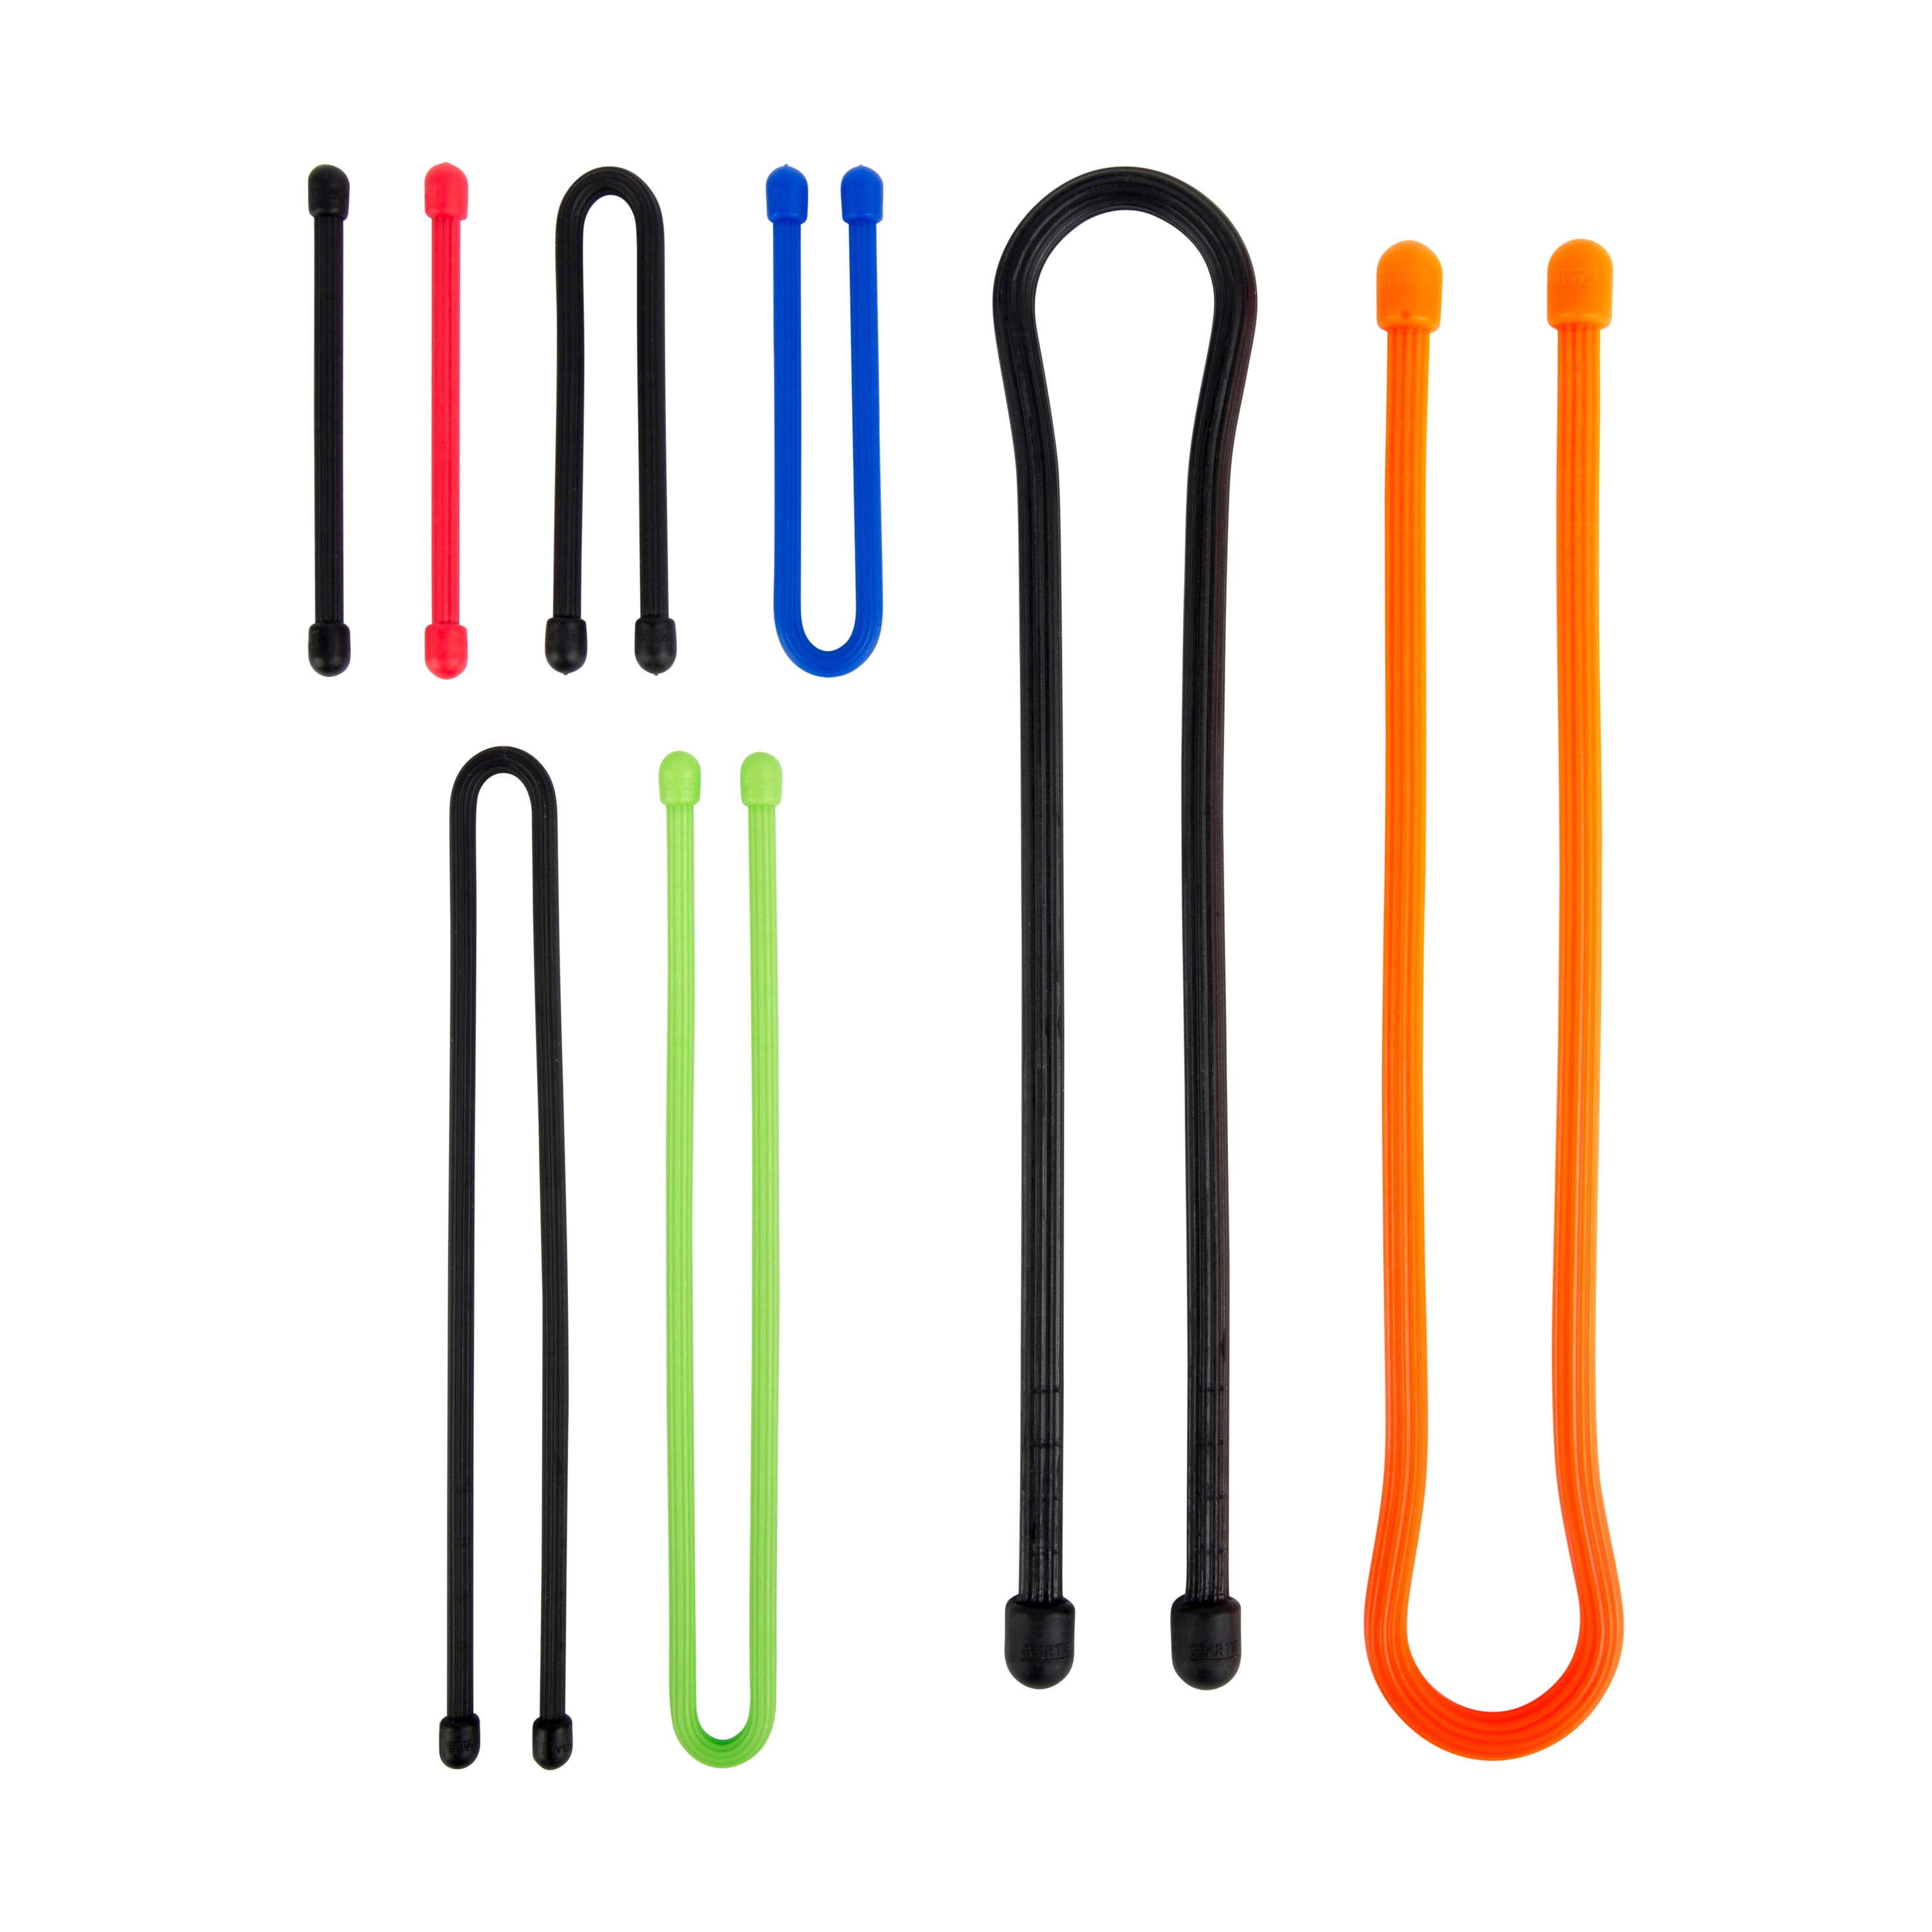 Pro-Knot Tying Kit 20 Essential Ones For Ropes With Cords & Carabiner  Waterproof